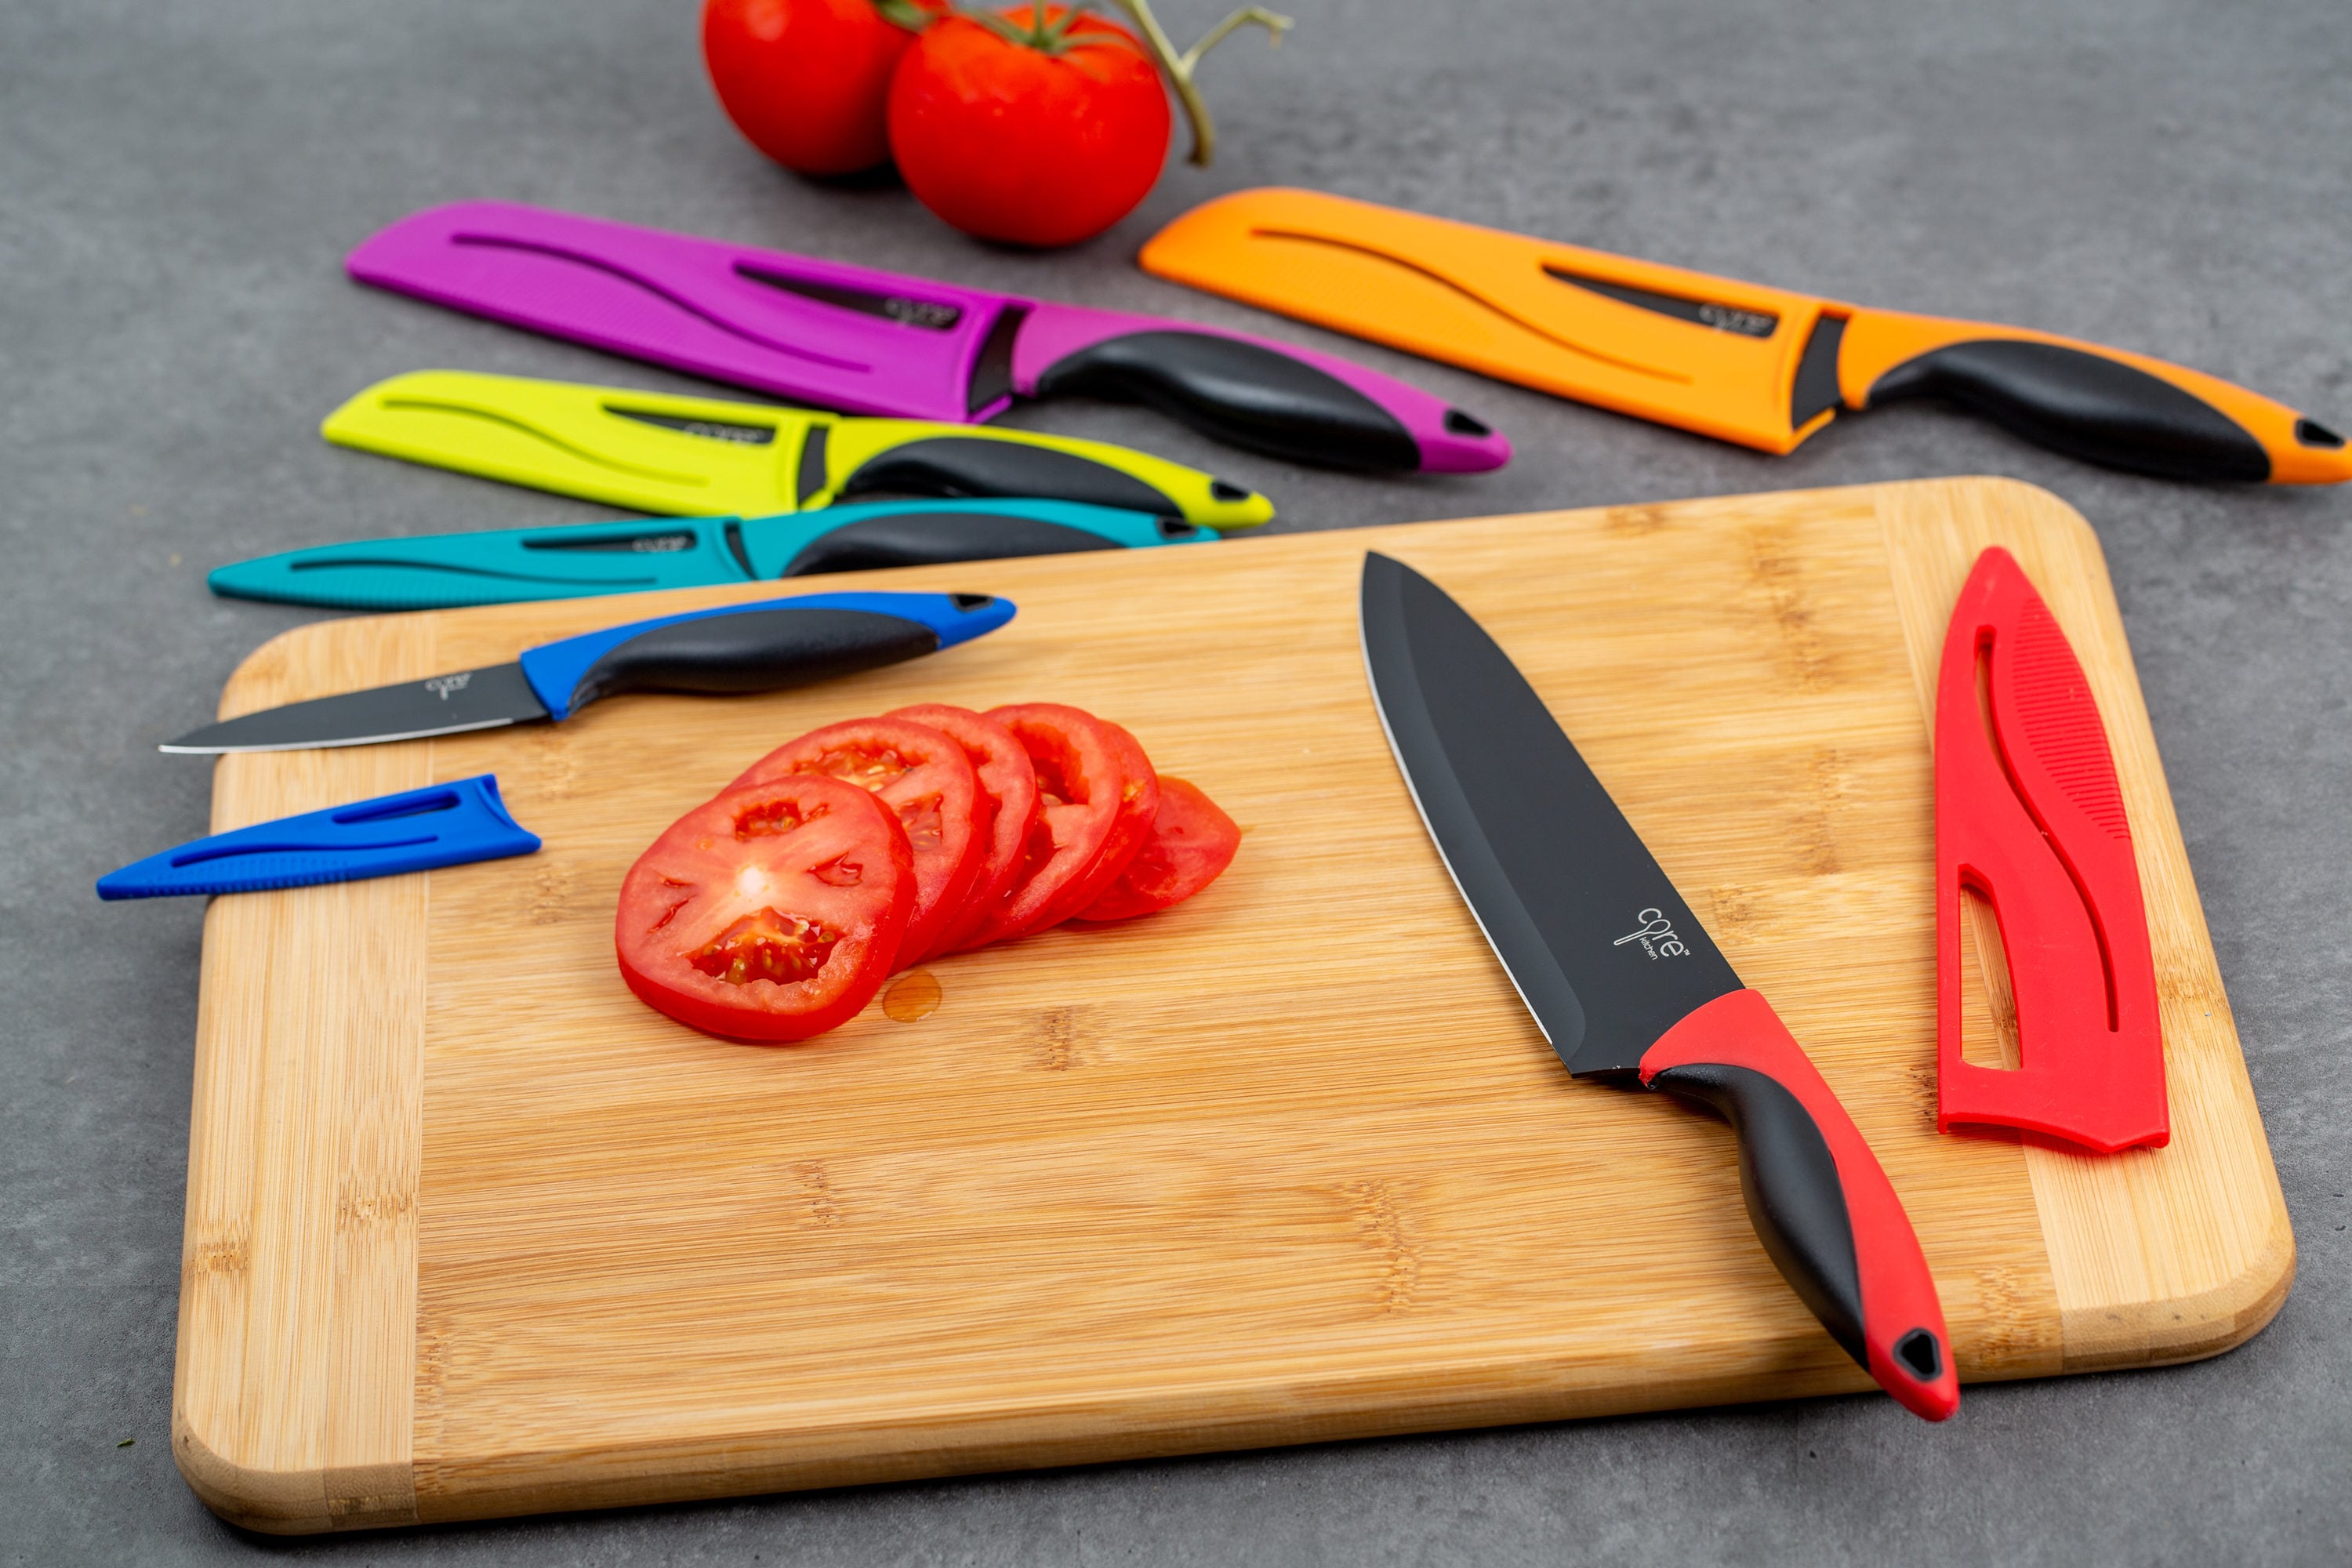 12 Piece Printed Color Knife Set with Blade Guards 